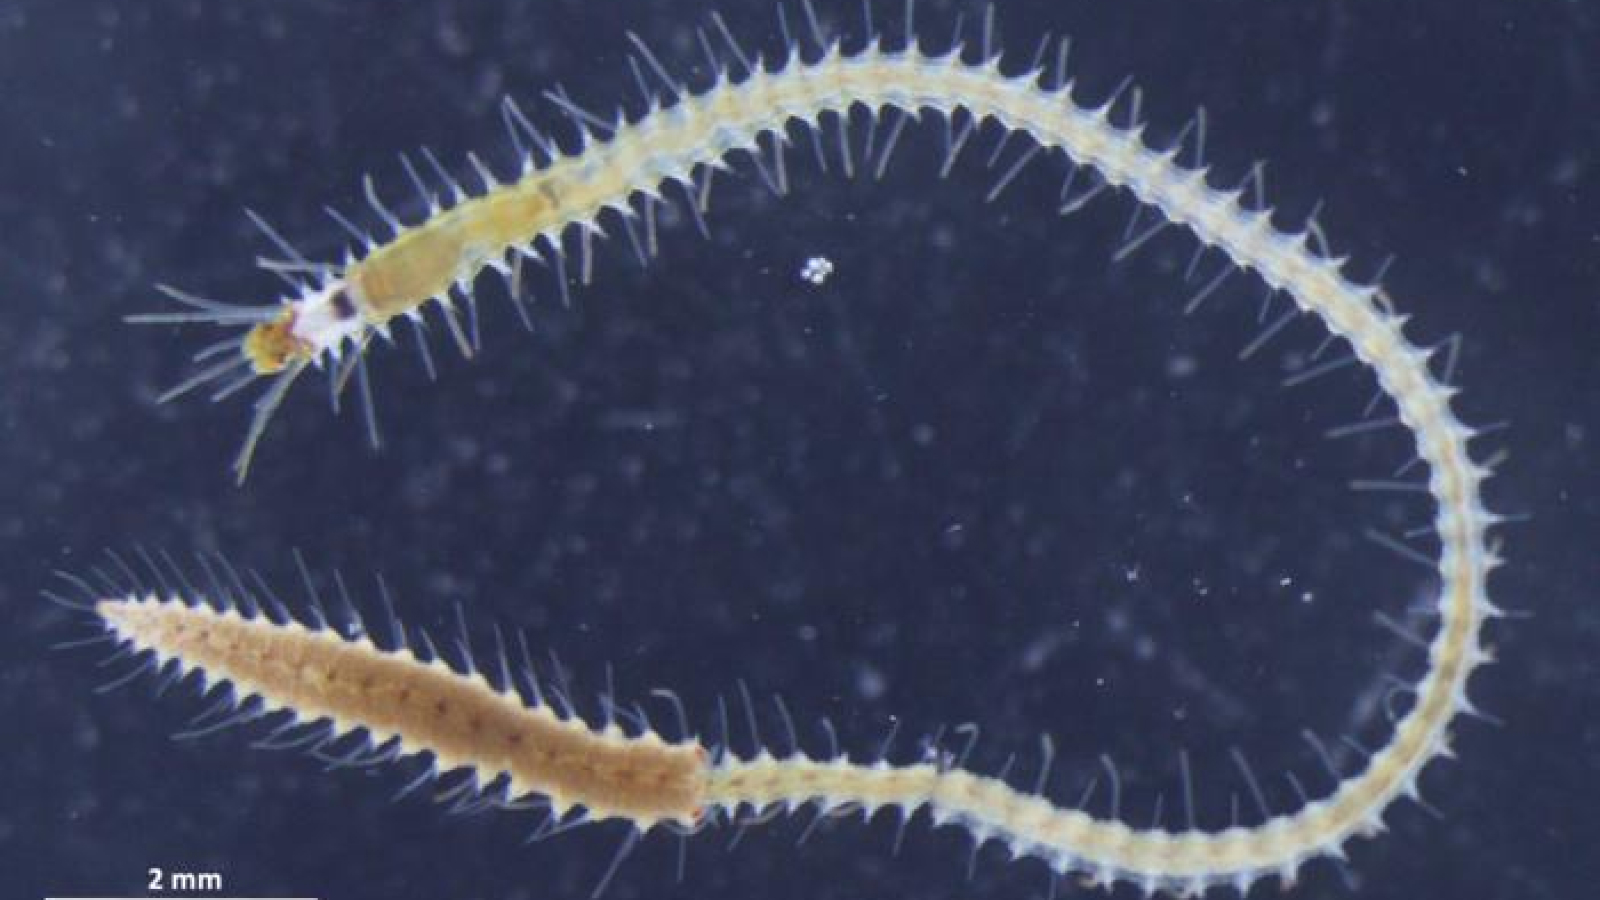 Strange sea worms have butts that grow a brain before wriggling off to find a mate